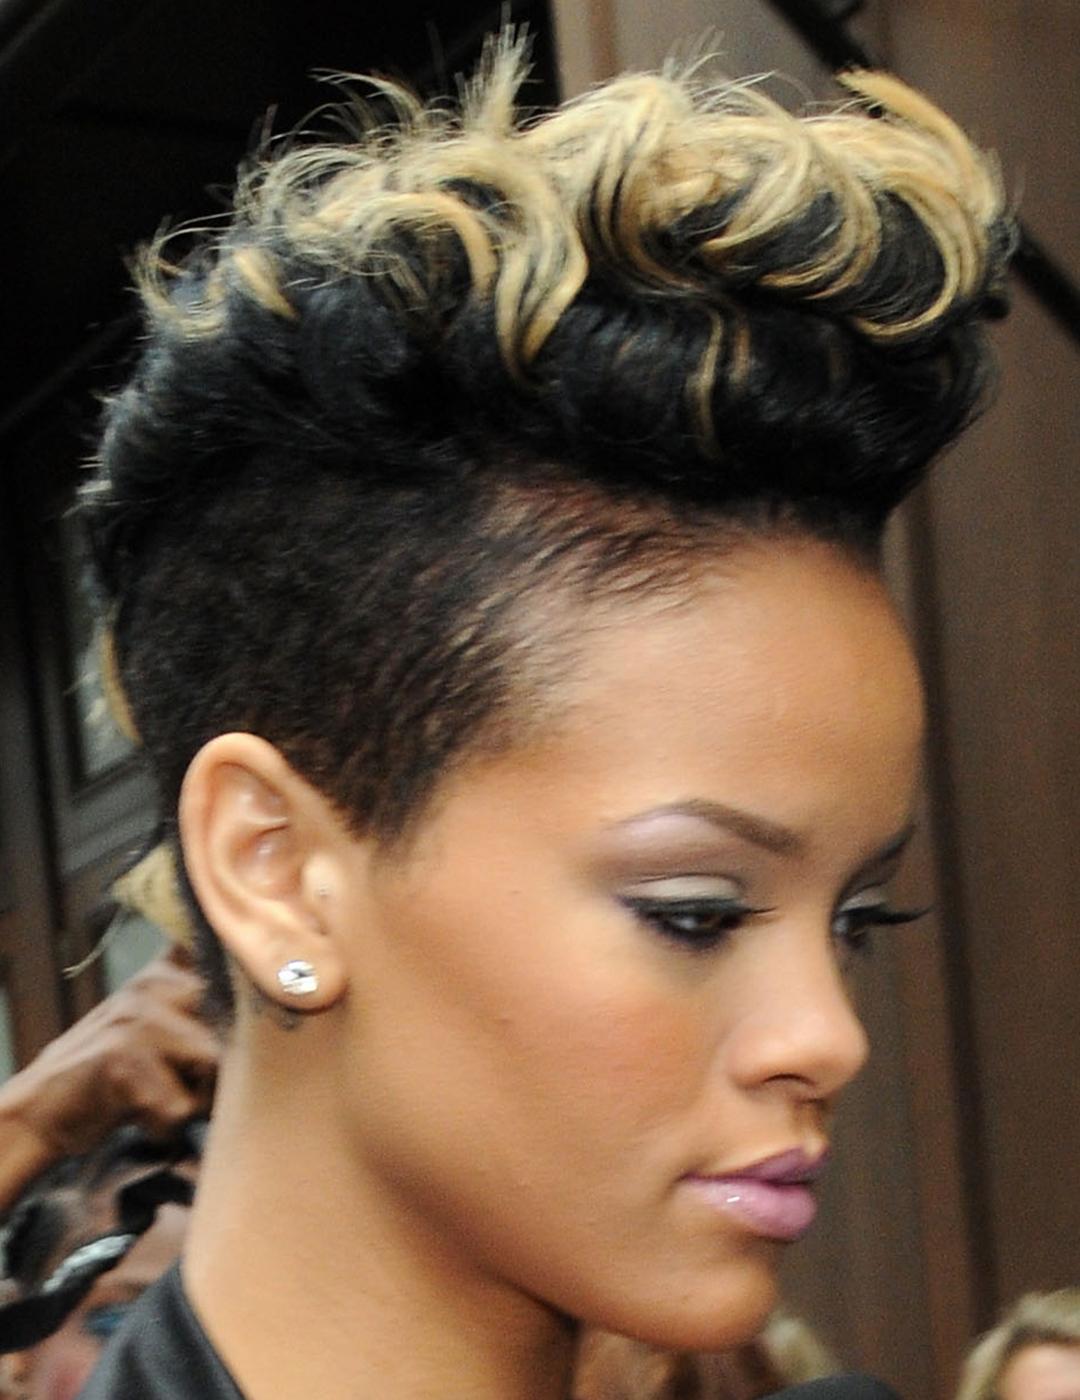 A photo of Rihanna with short hair with bleached ends